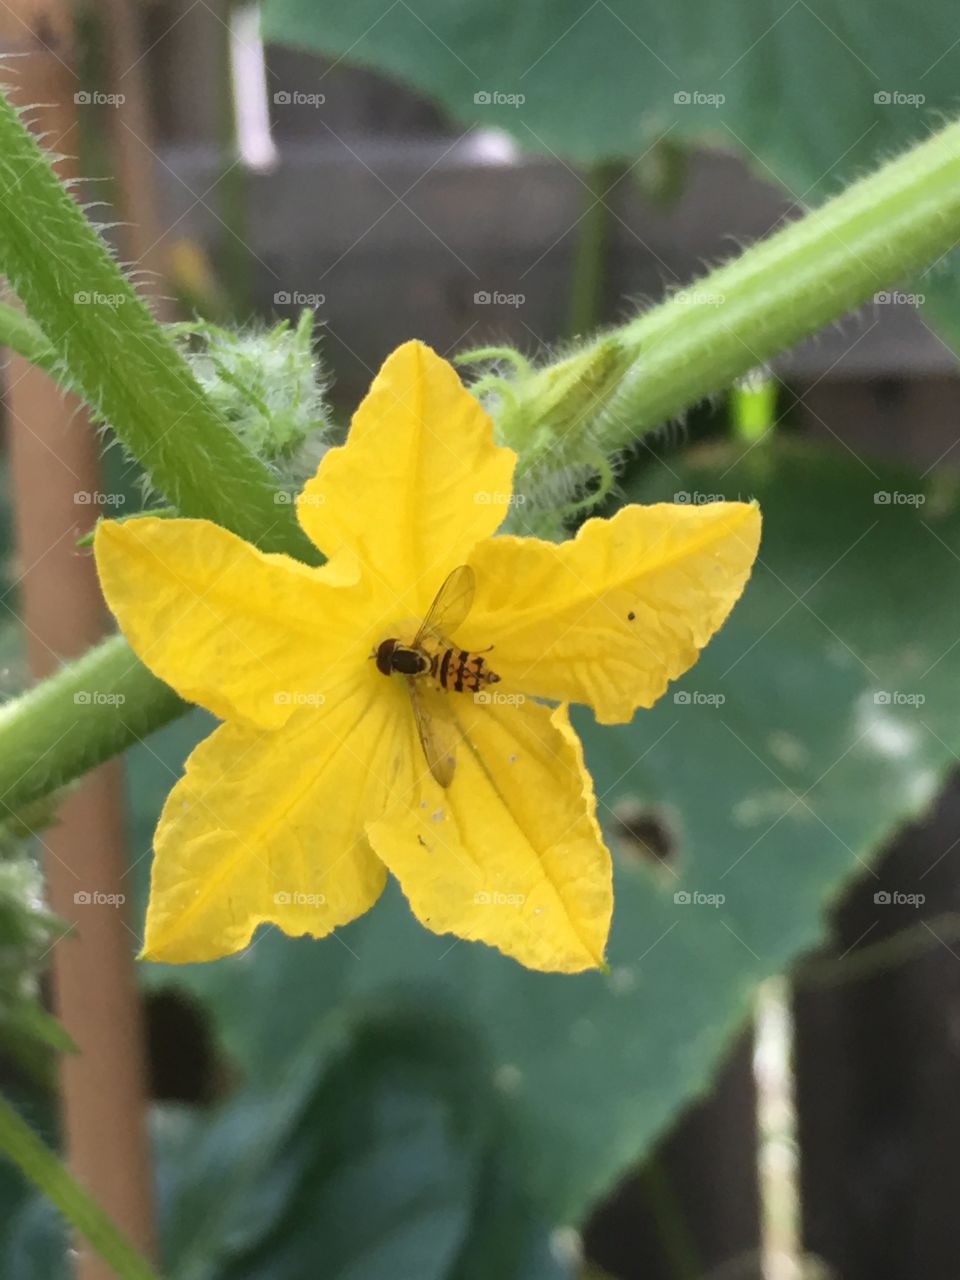 Spectacular nature! A tiny bee pollinates a stunning cucumber bloom! 